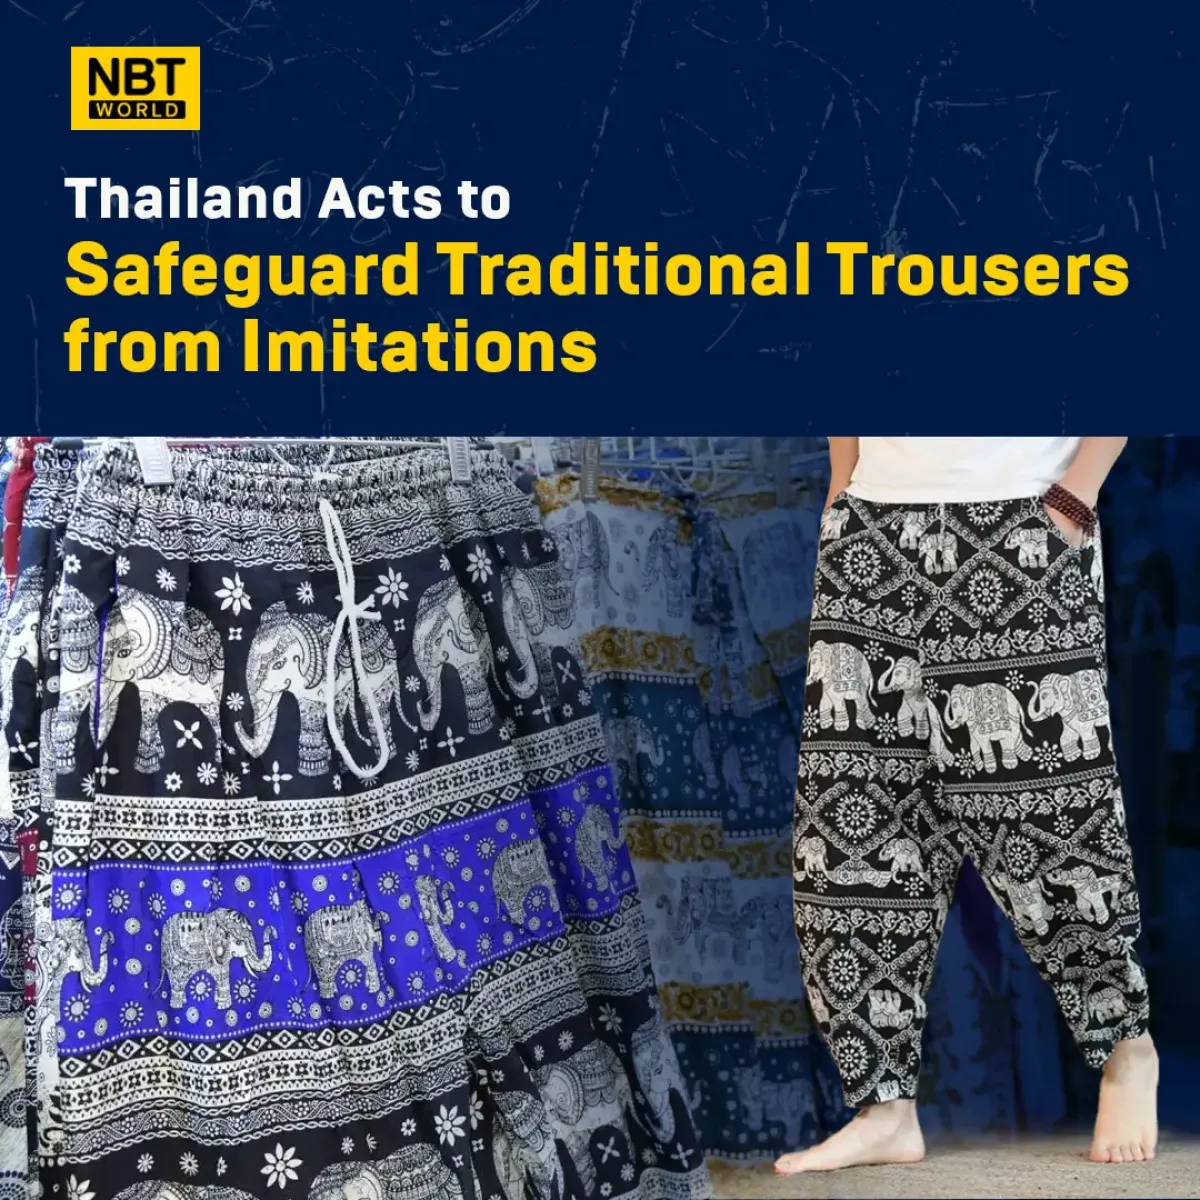 Thailand Acts to Safeguard Traditional Trousers from Imitations